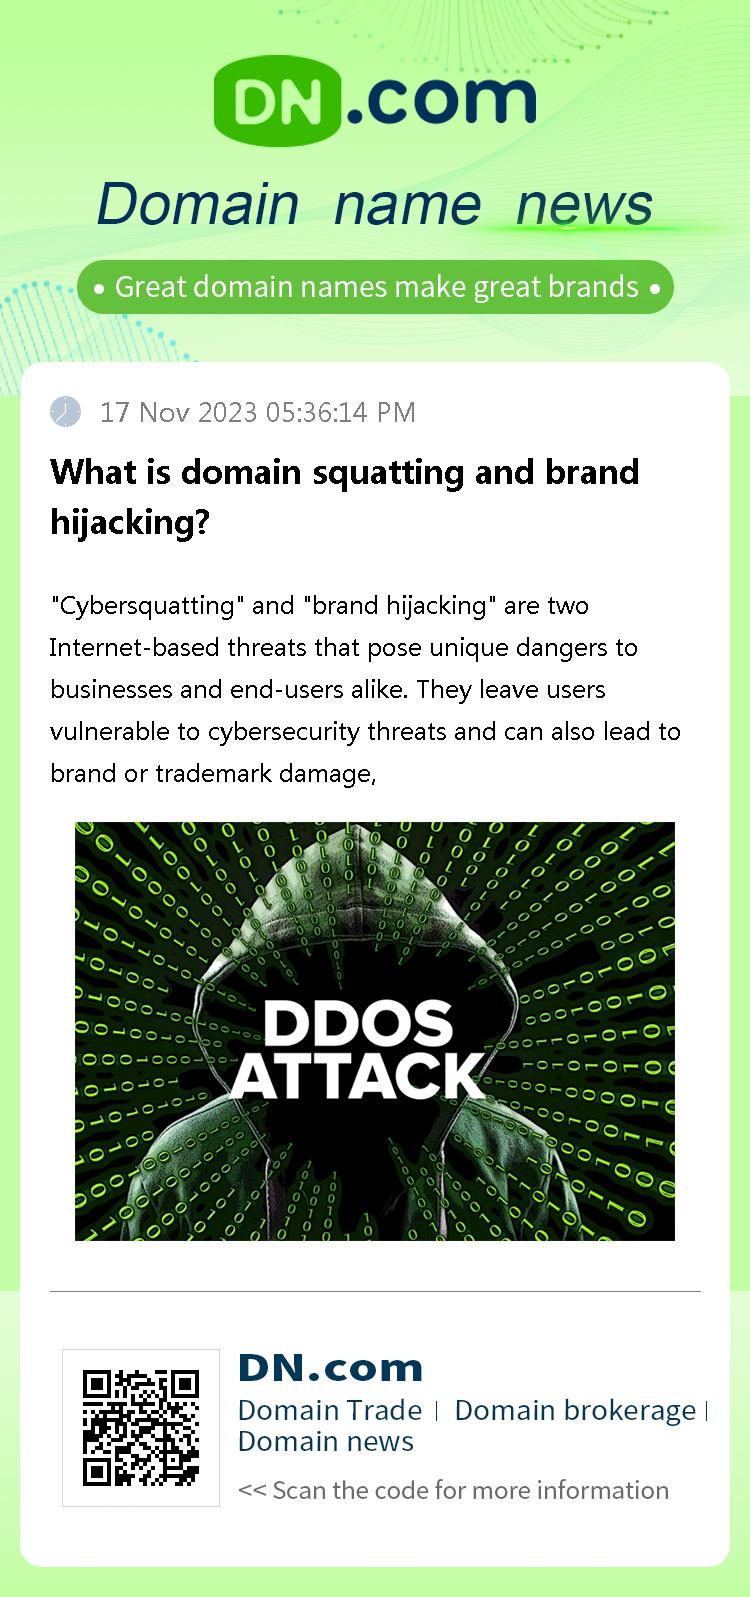 What is domain squatting and brand hijacking?